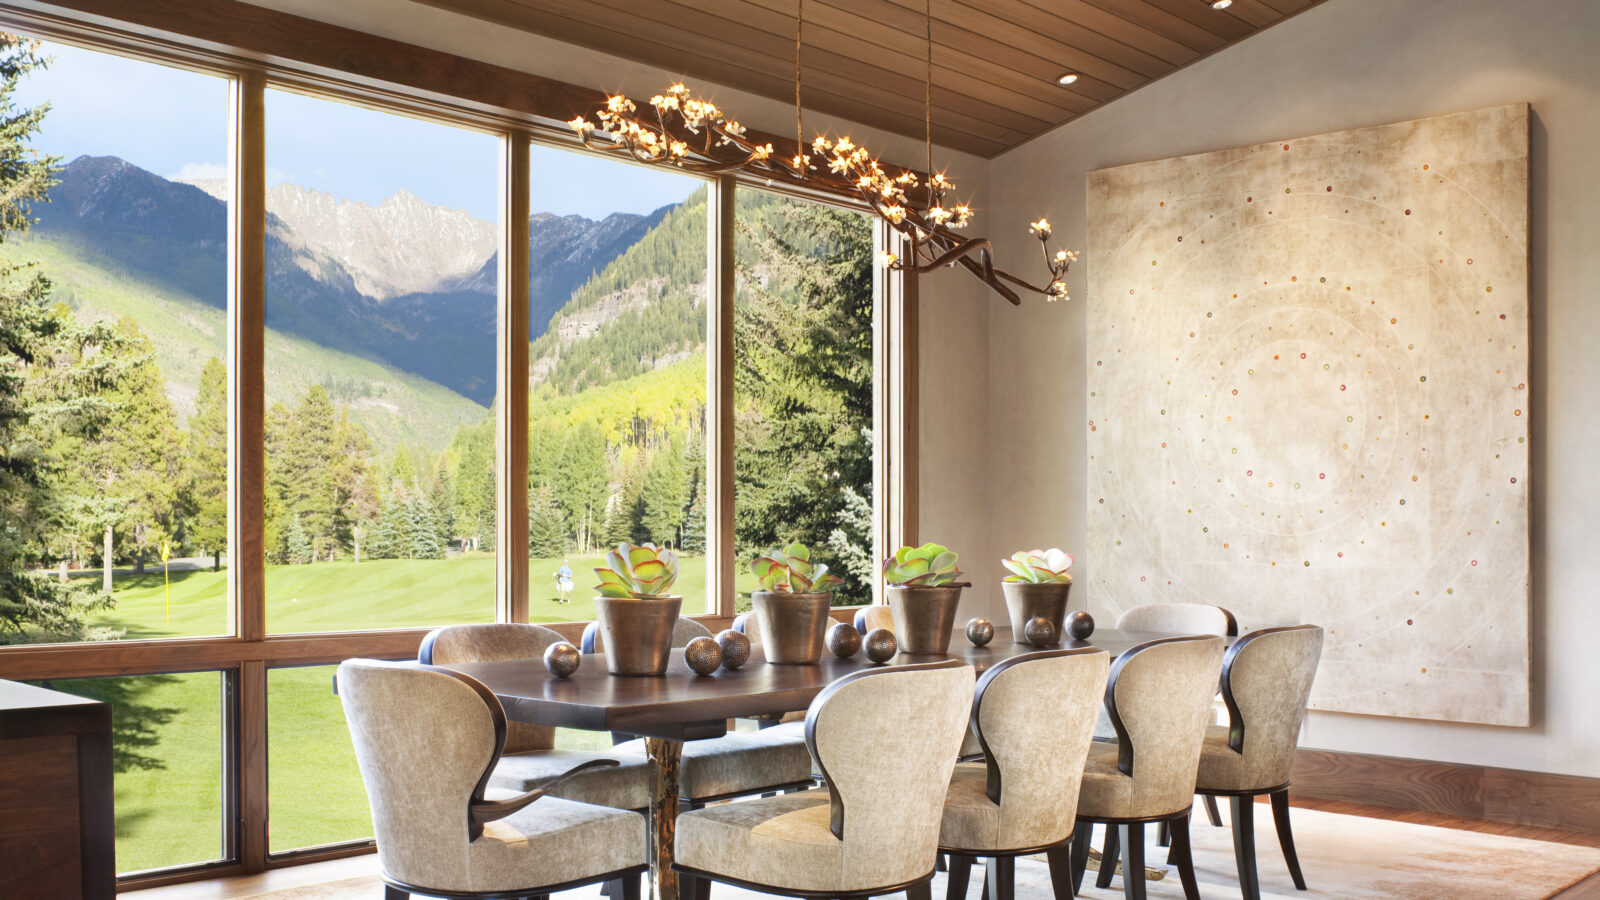 Dining area with neutral artwork, organic chandelier, floor to celling windows, and views of the golf course and mountains.